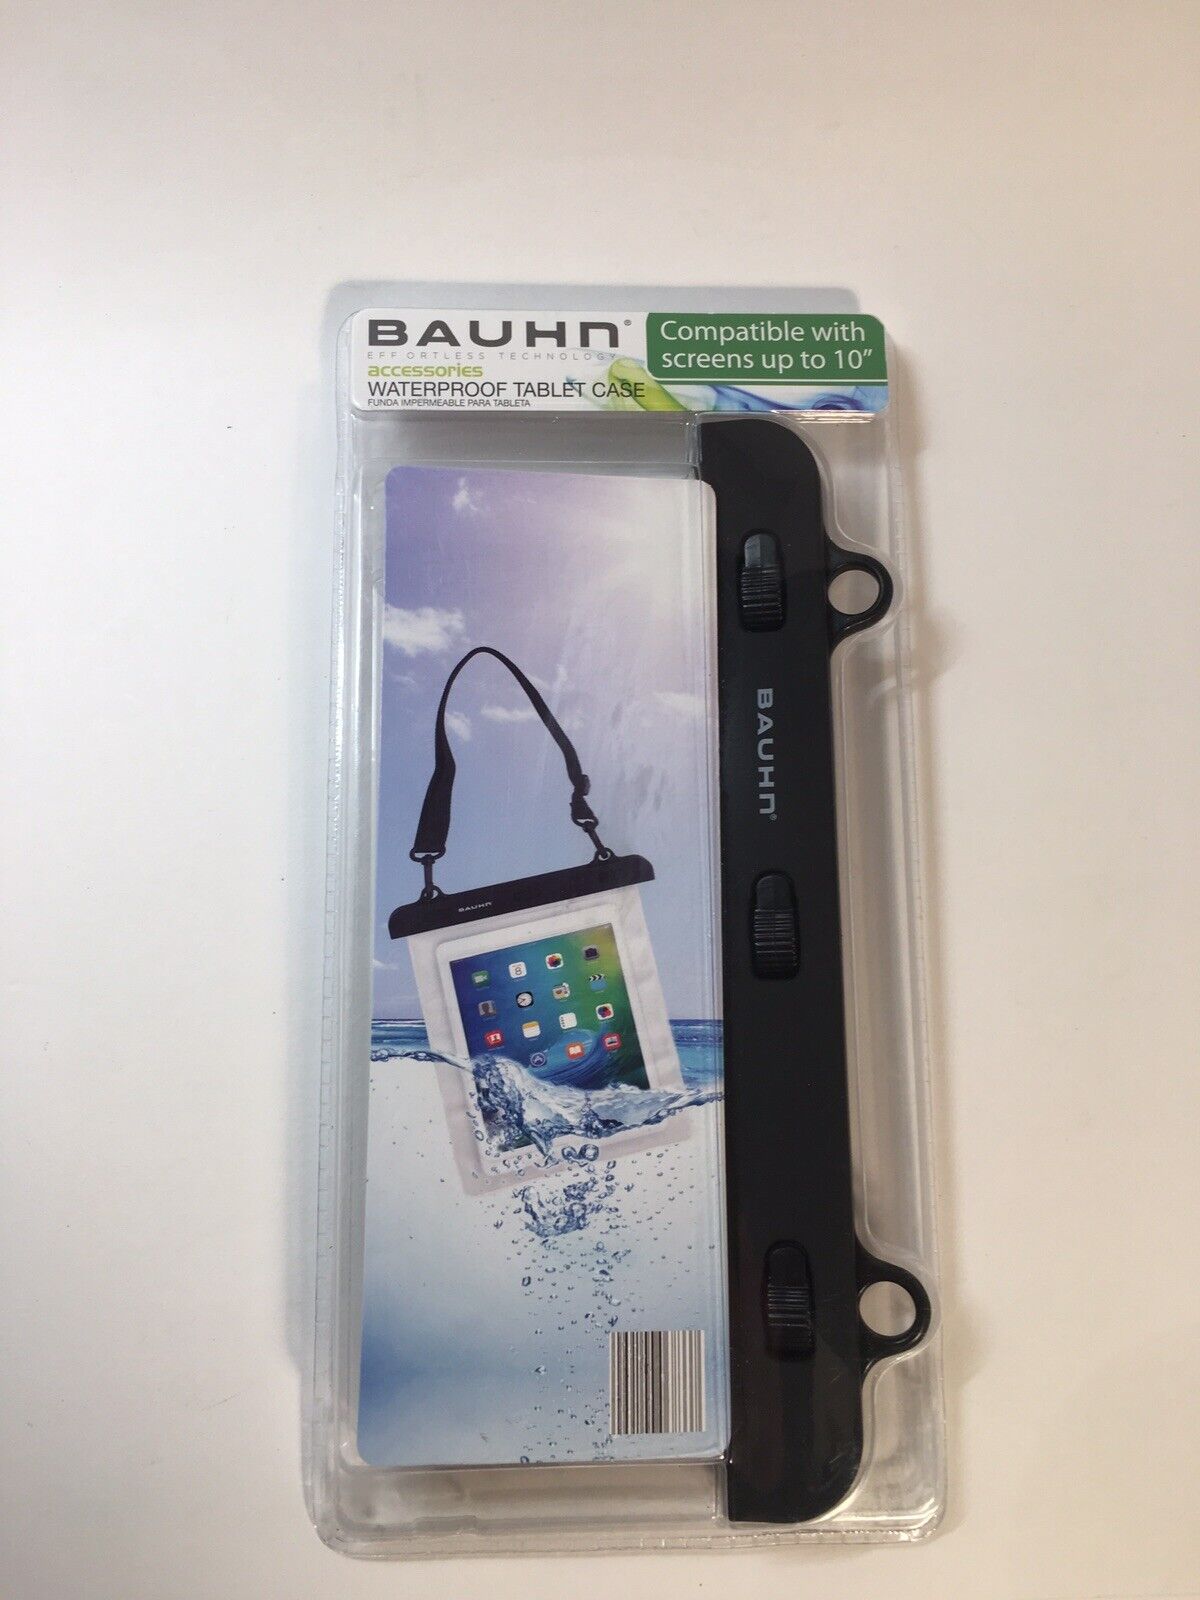 Bauhn Waterproof Tablet Case - For Up To 10" Screen Tablets